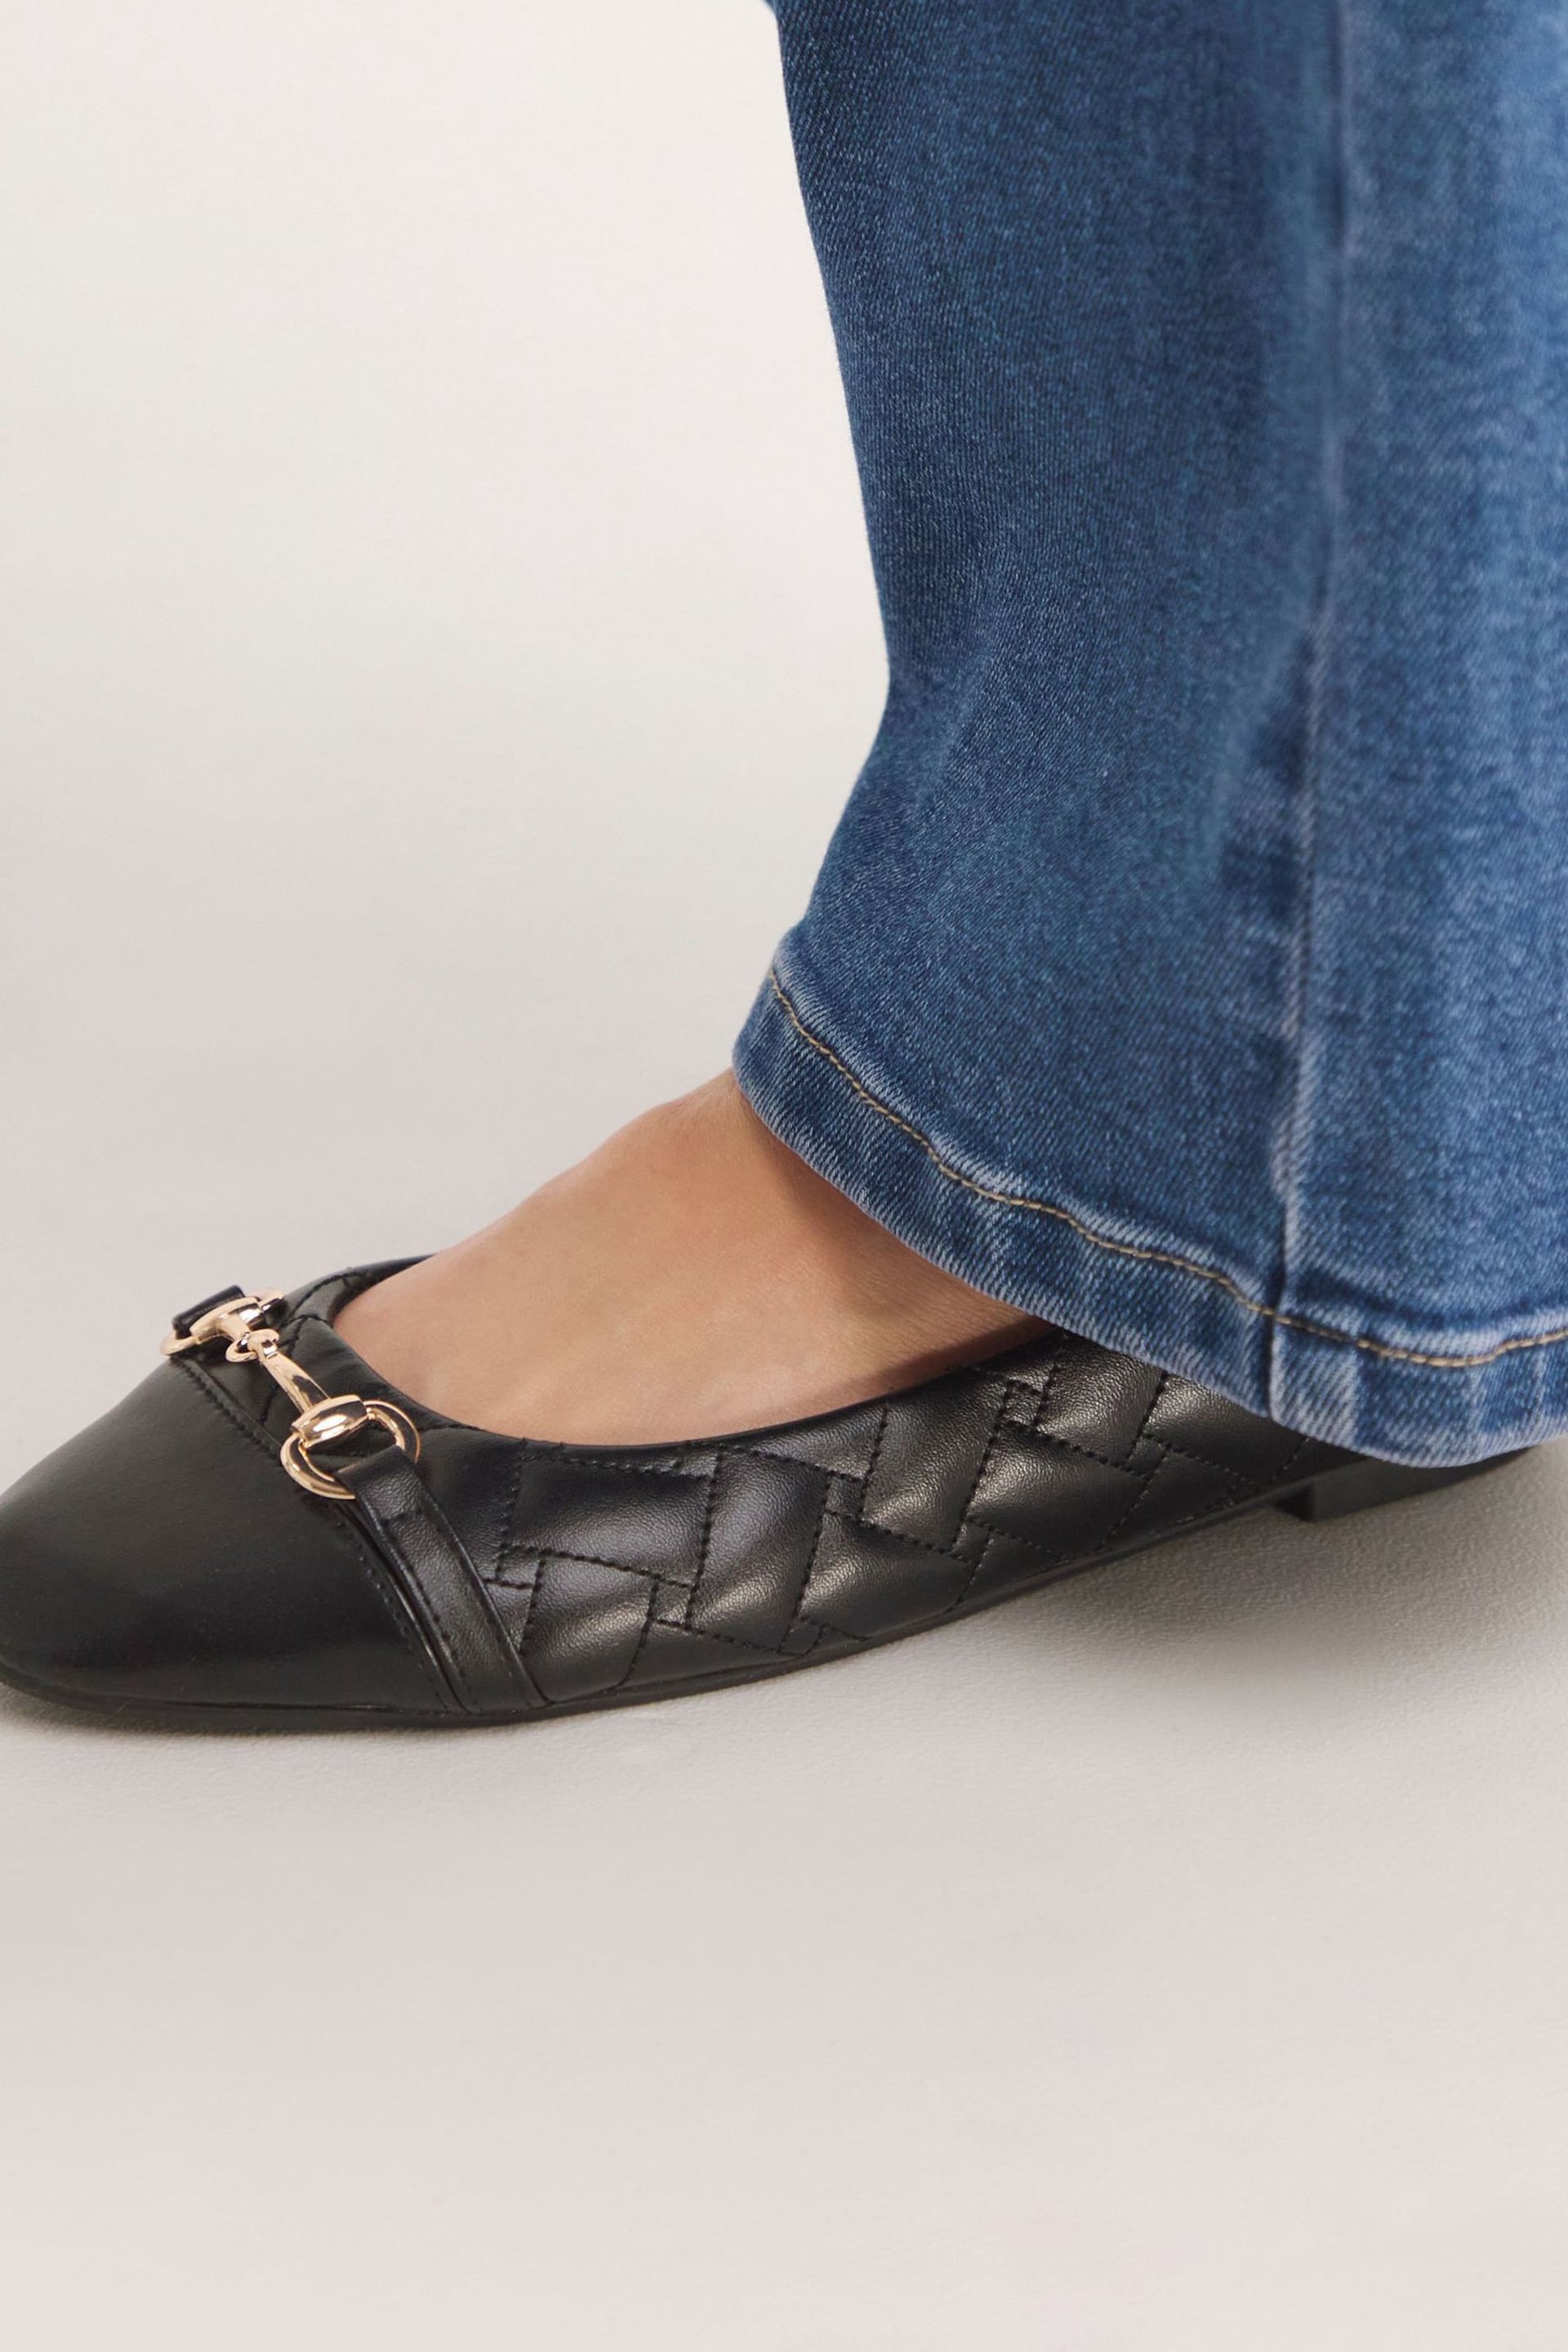 Simply Be Black Extra Wide Fit Quilted Snaffle Ballerina Shoes - Image 4 of 4